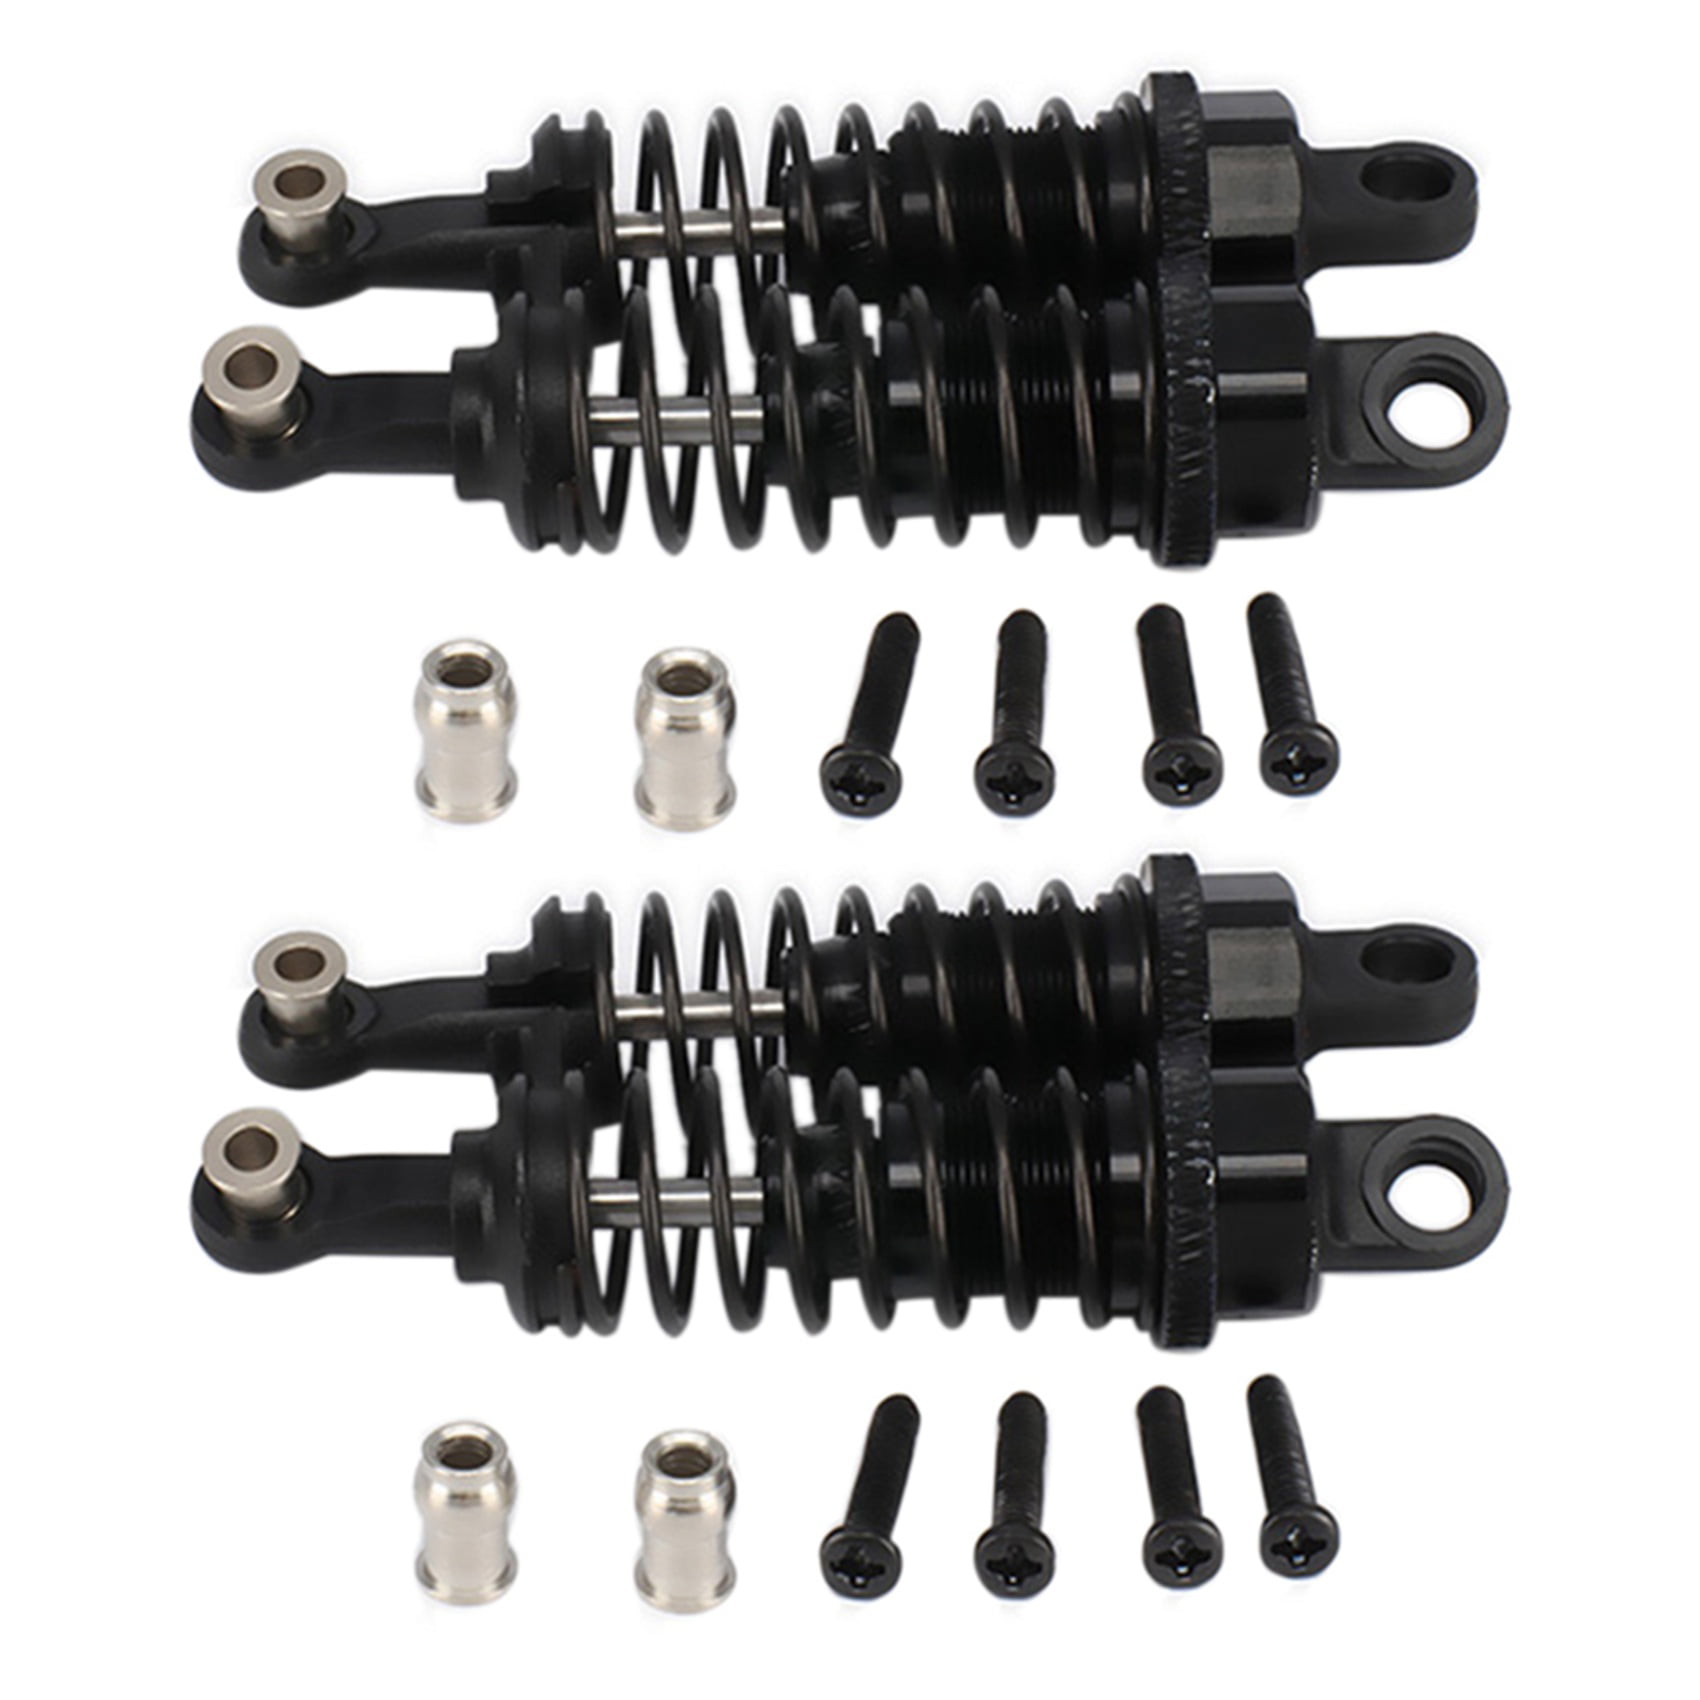 4Pcs Alloy Shock Absorbers Damper for RC Car 1/18 WLtoys A959 A969 A979 K929 New 